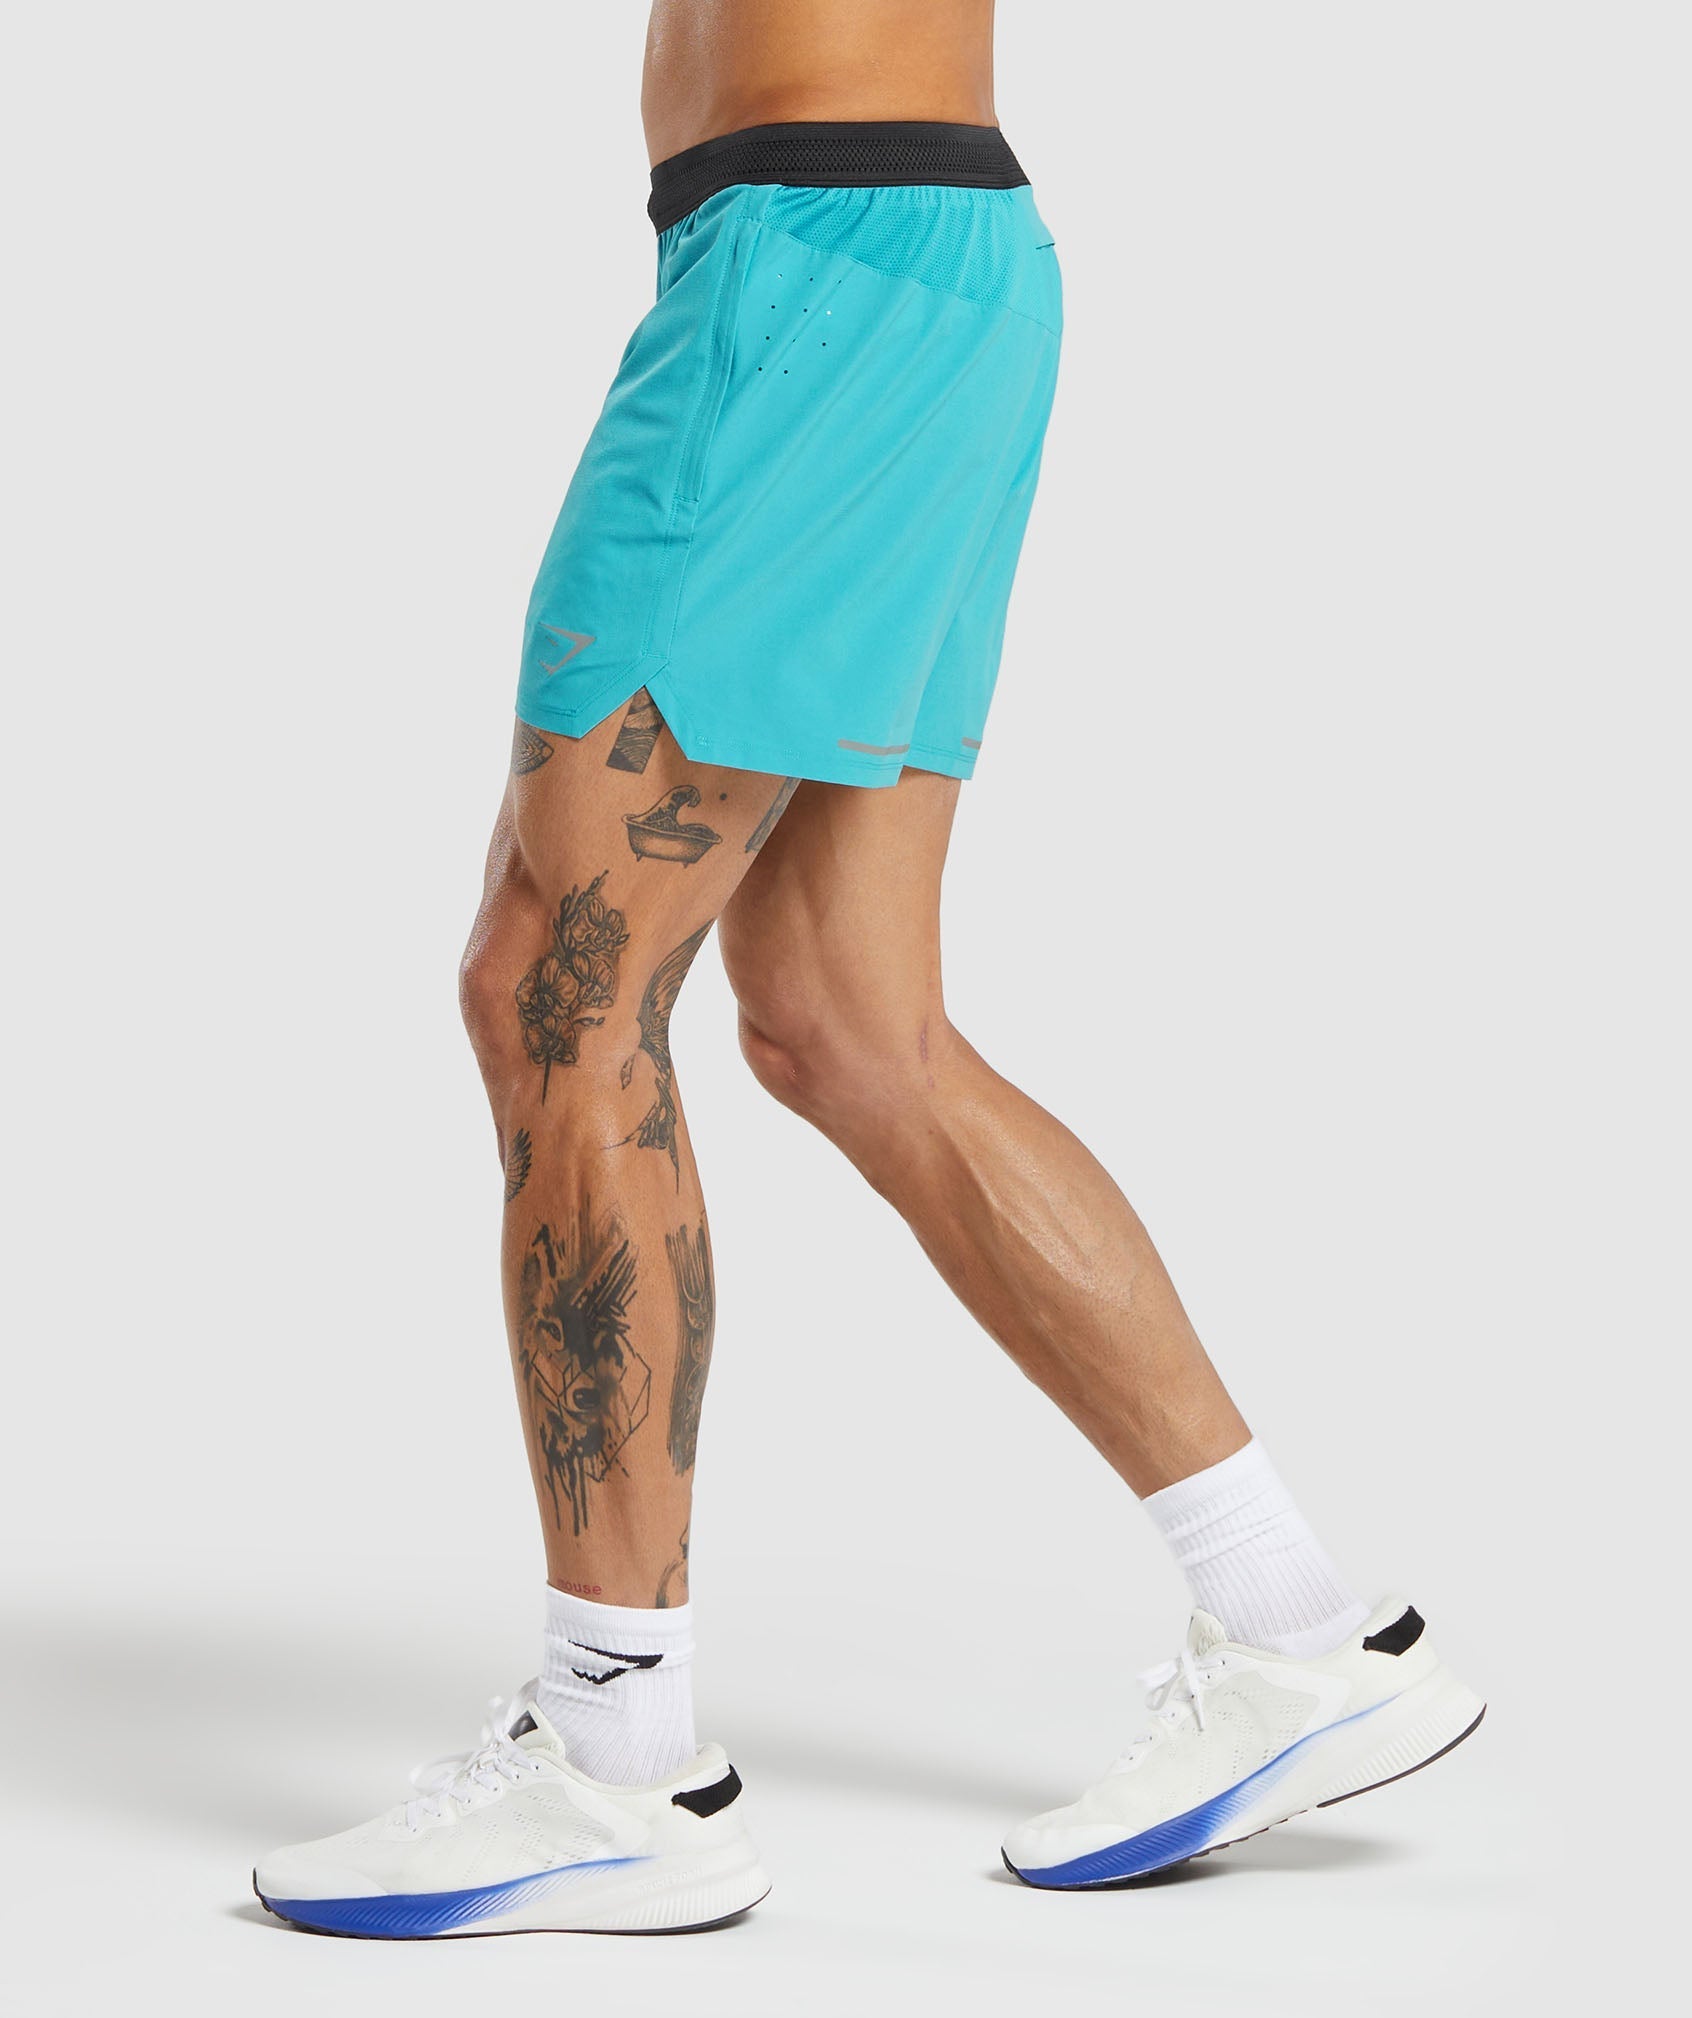 Speed 5" Shorts in Artificial Teal - view 3